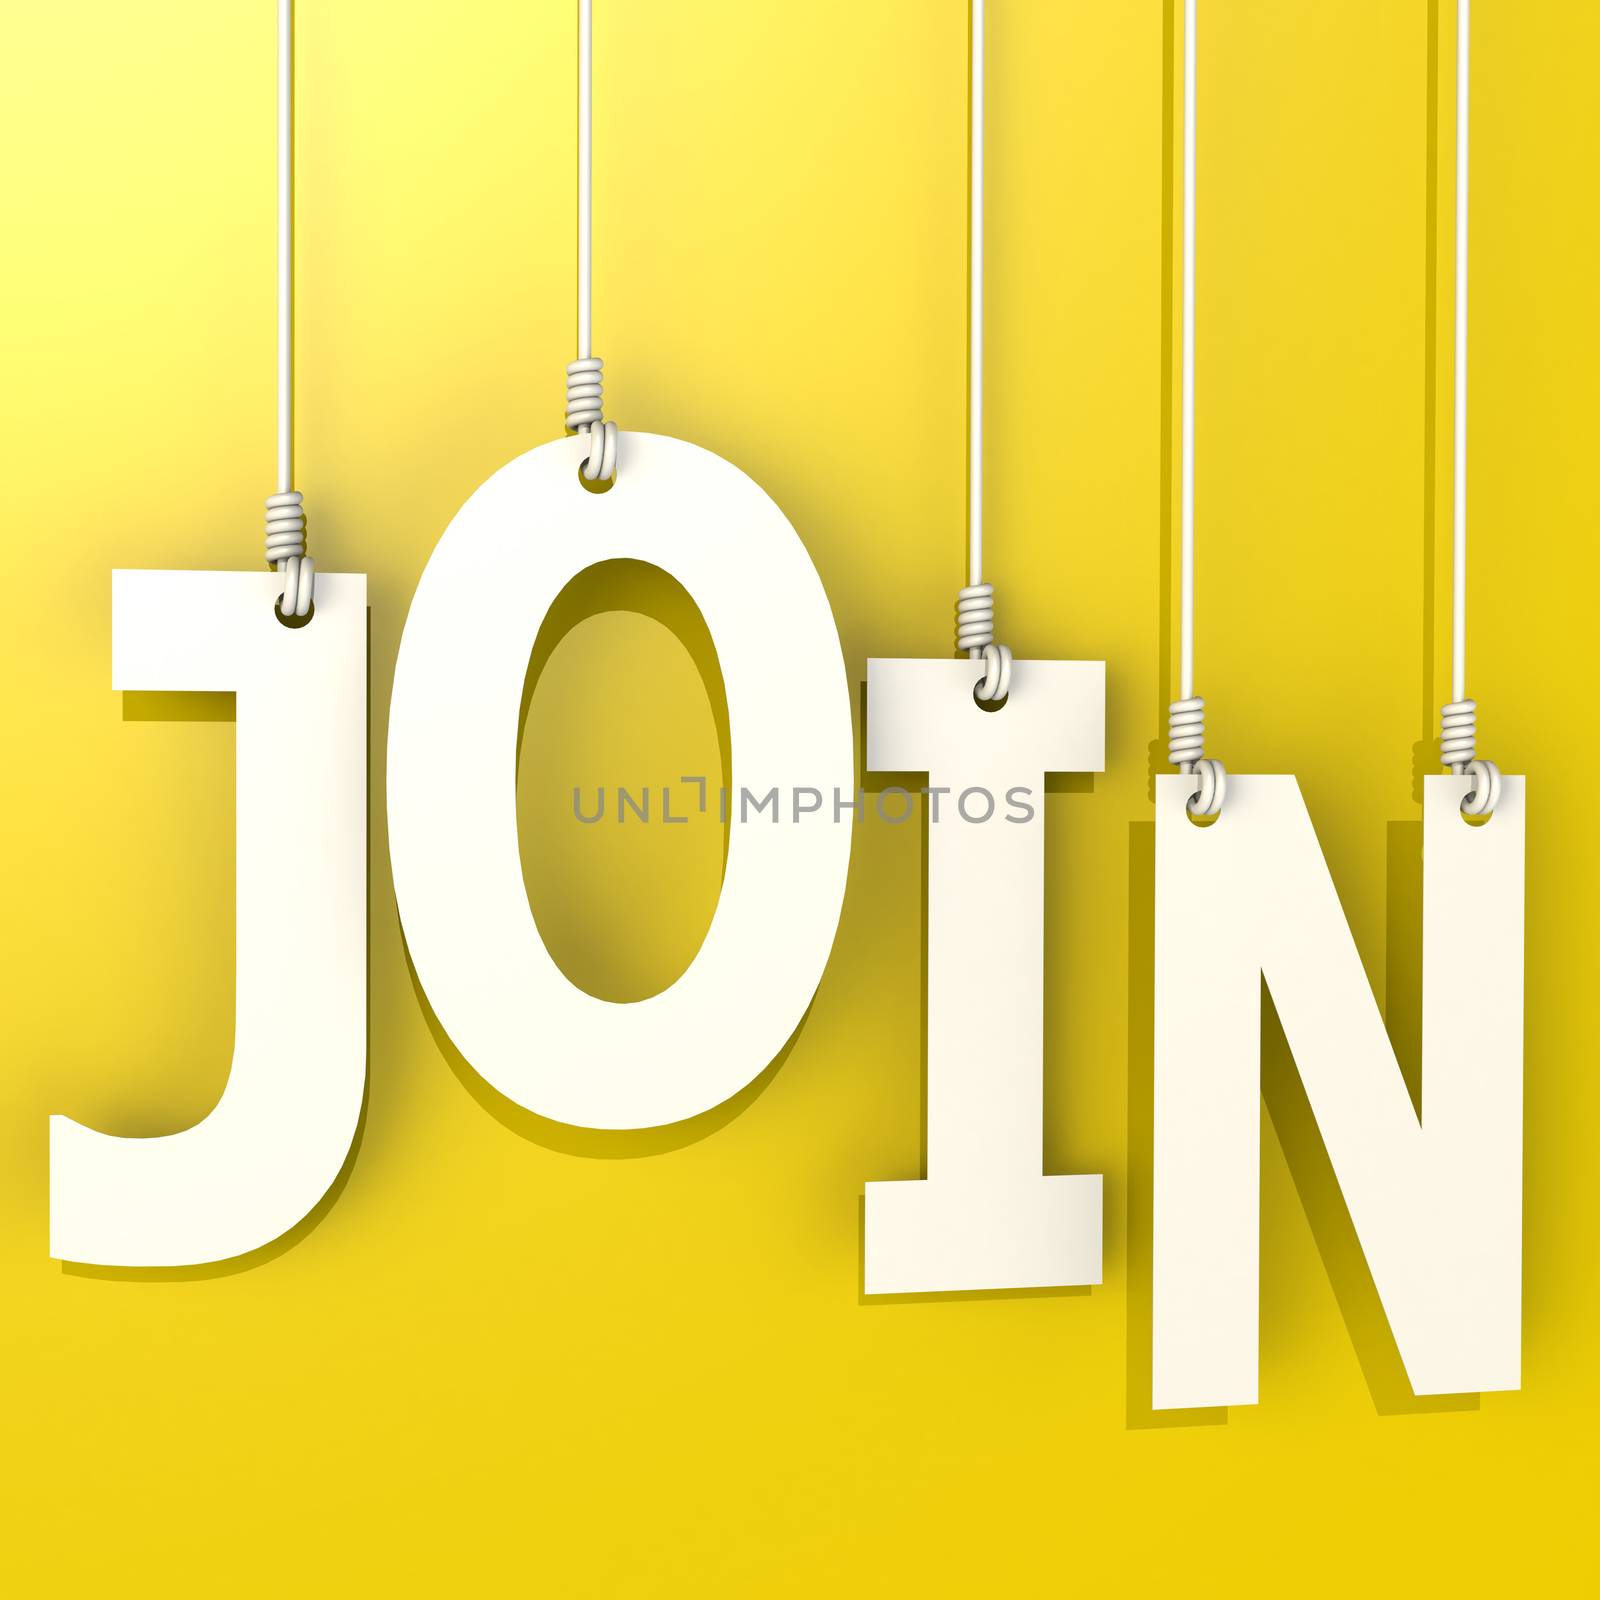 Join word hang on yellow background image with hi-res rendered artwork that could be used for any graphic design.